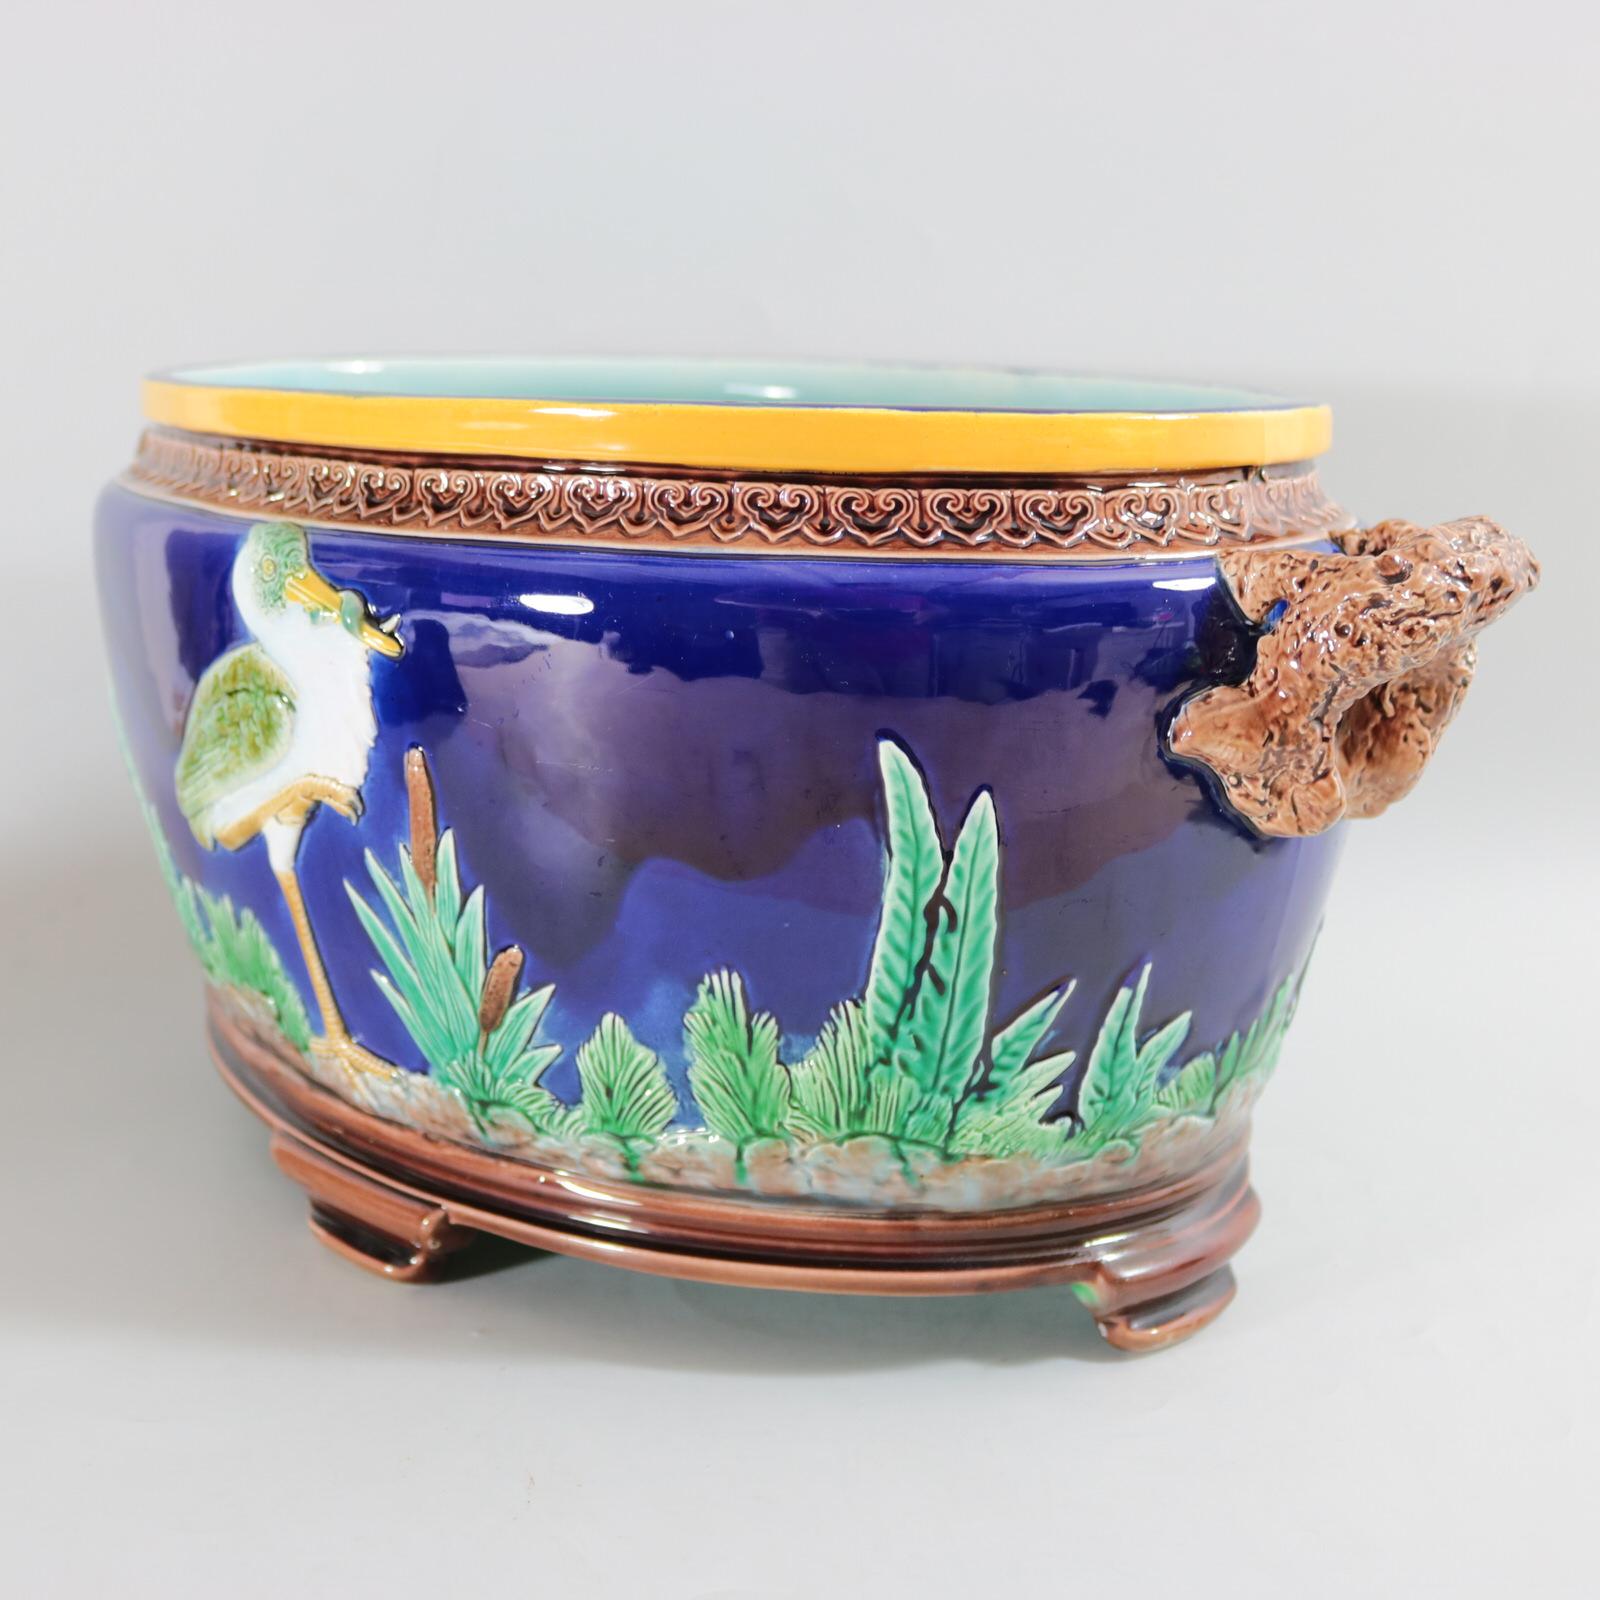 Holdcroft Majolica jardinière which features a heron stood holding prey, amongst bullrushes/cattails and foliage. Colouration: cobalt blue, green, brown, are predominant.